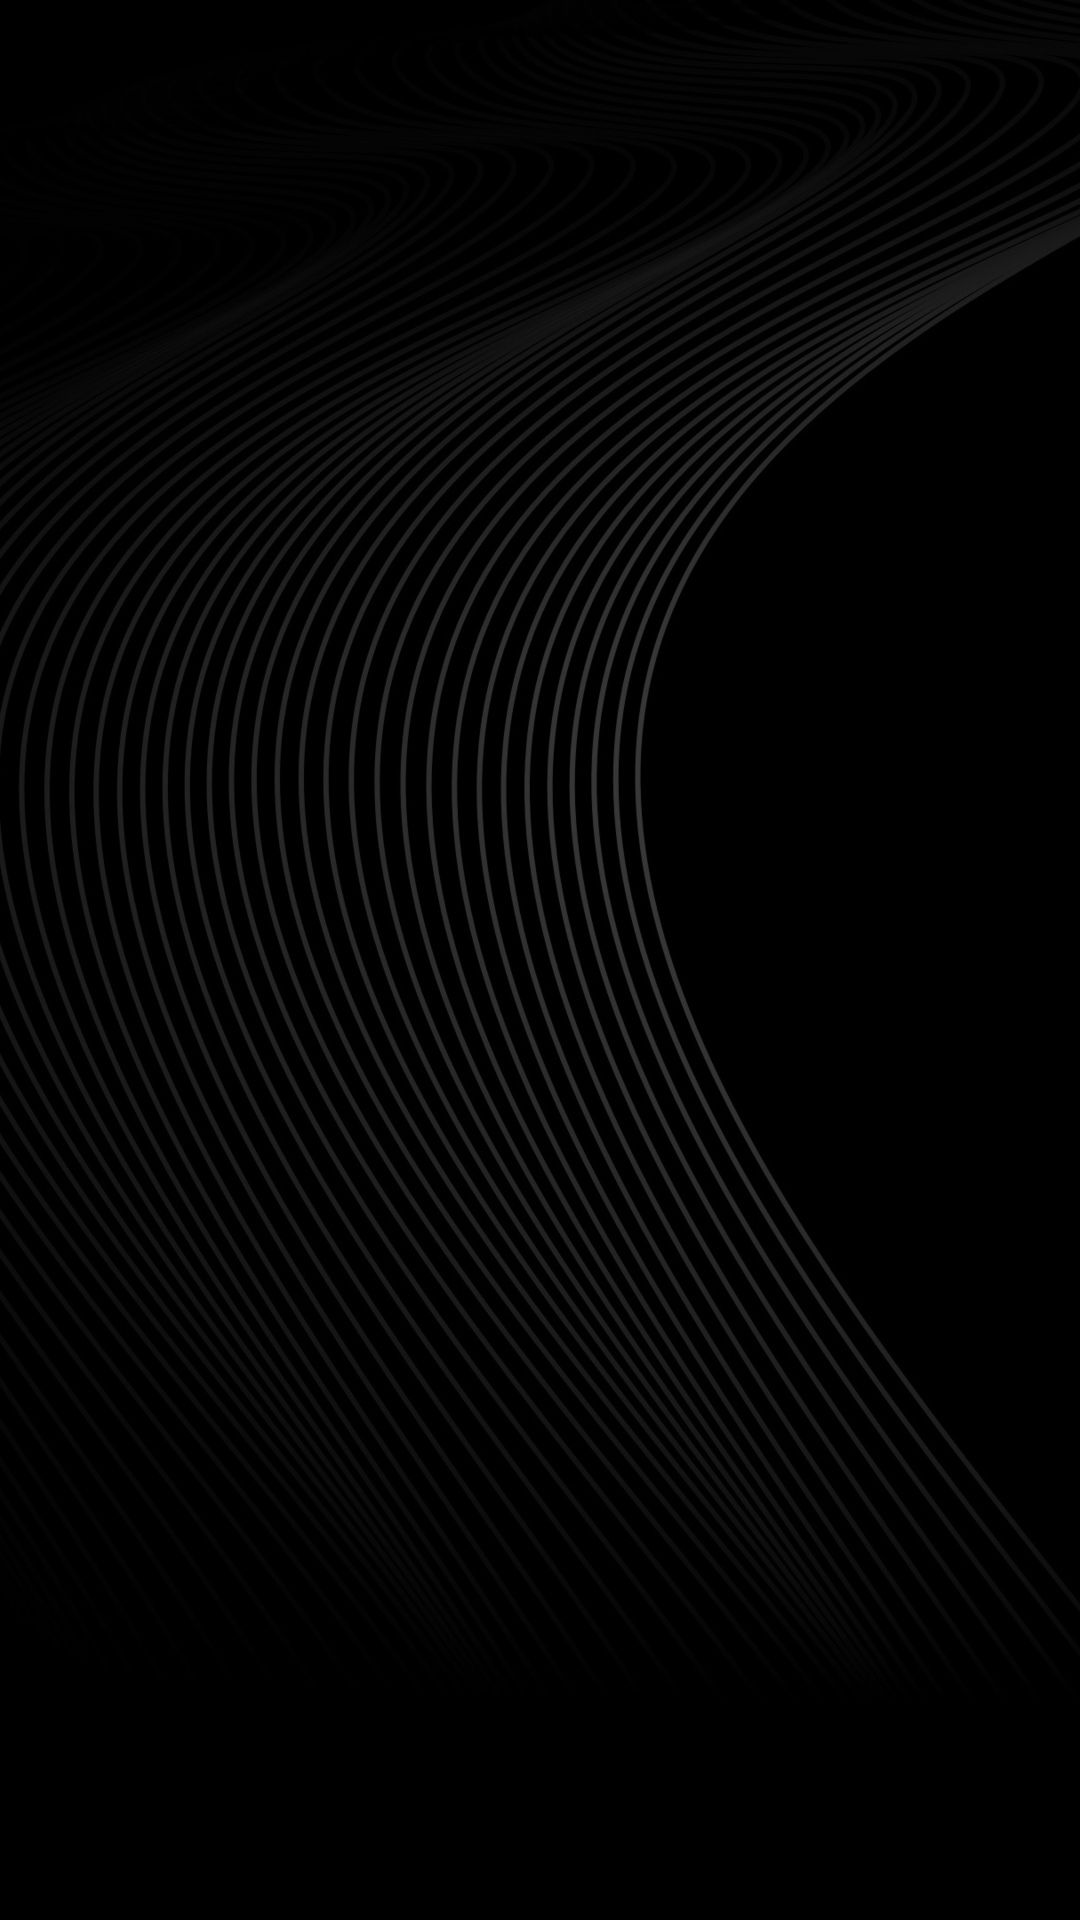 1080x1920 lines, simple background, abstract, hd, dark, black, dribbble, oled for iPhone 8 wallpaper